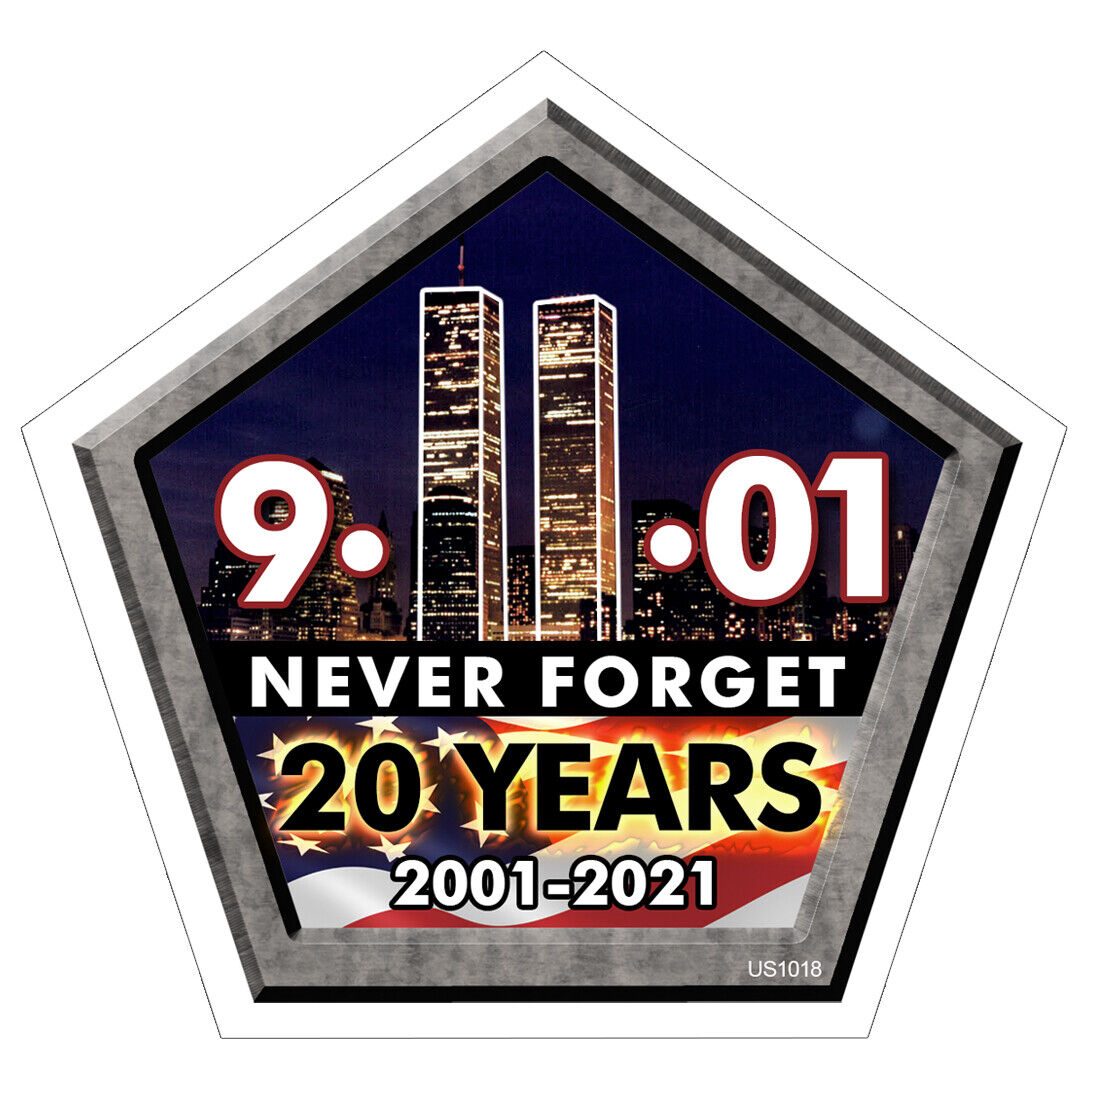 9/11 20 Year Anniversary Sticker - Never Forget Remember Twin Towers USA US1018